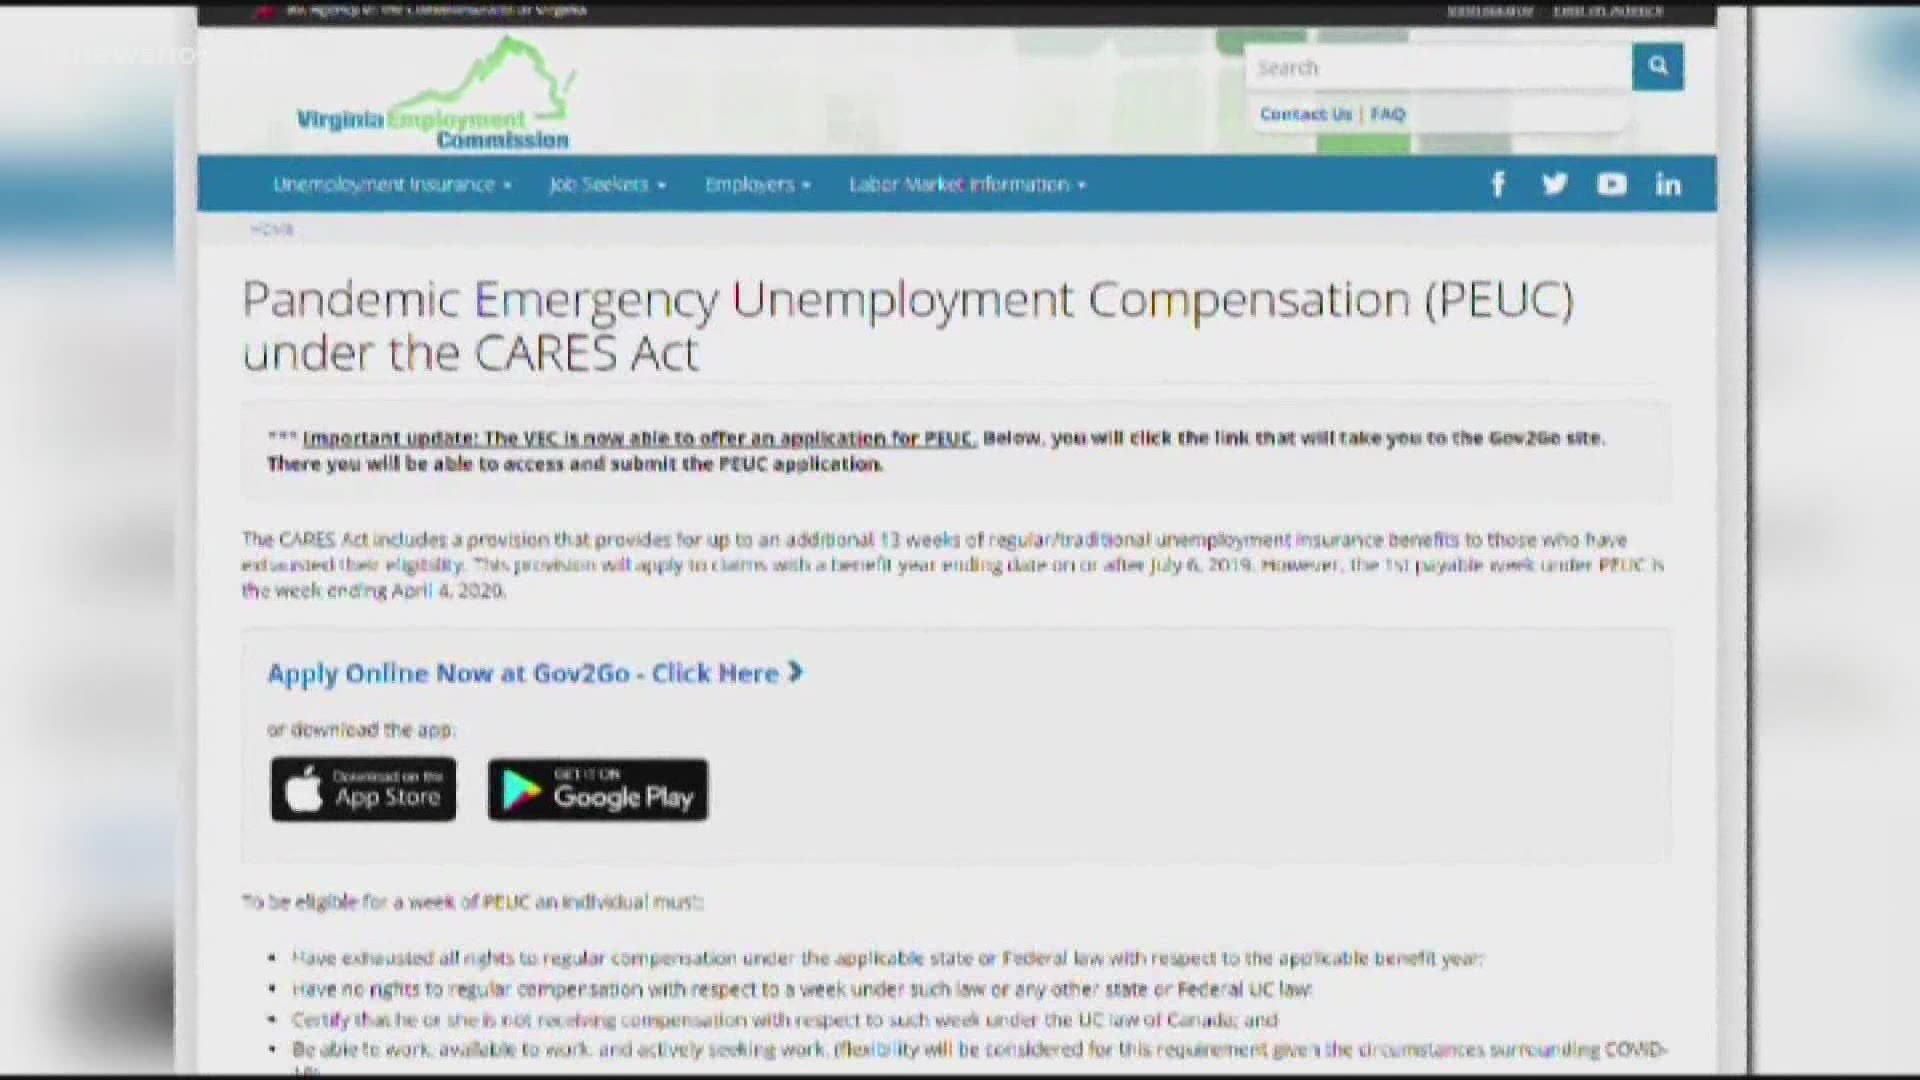 The Pandemic Emergency Unemployment Compensation program is being extended. The VEC will put up new applications starting Feb. 9.